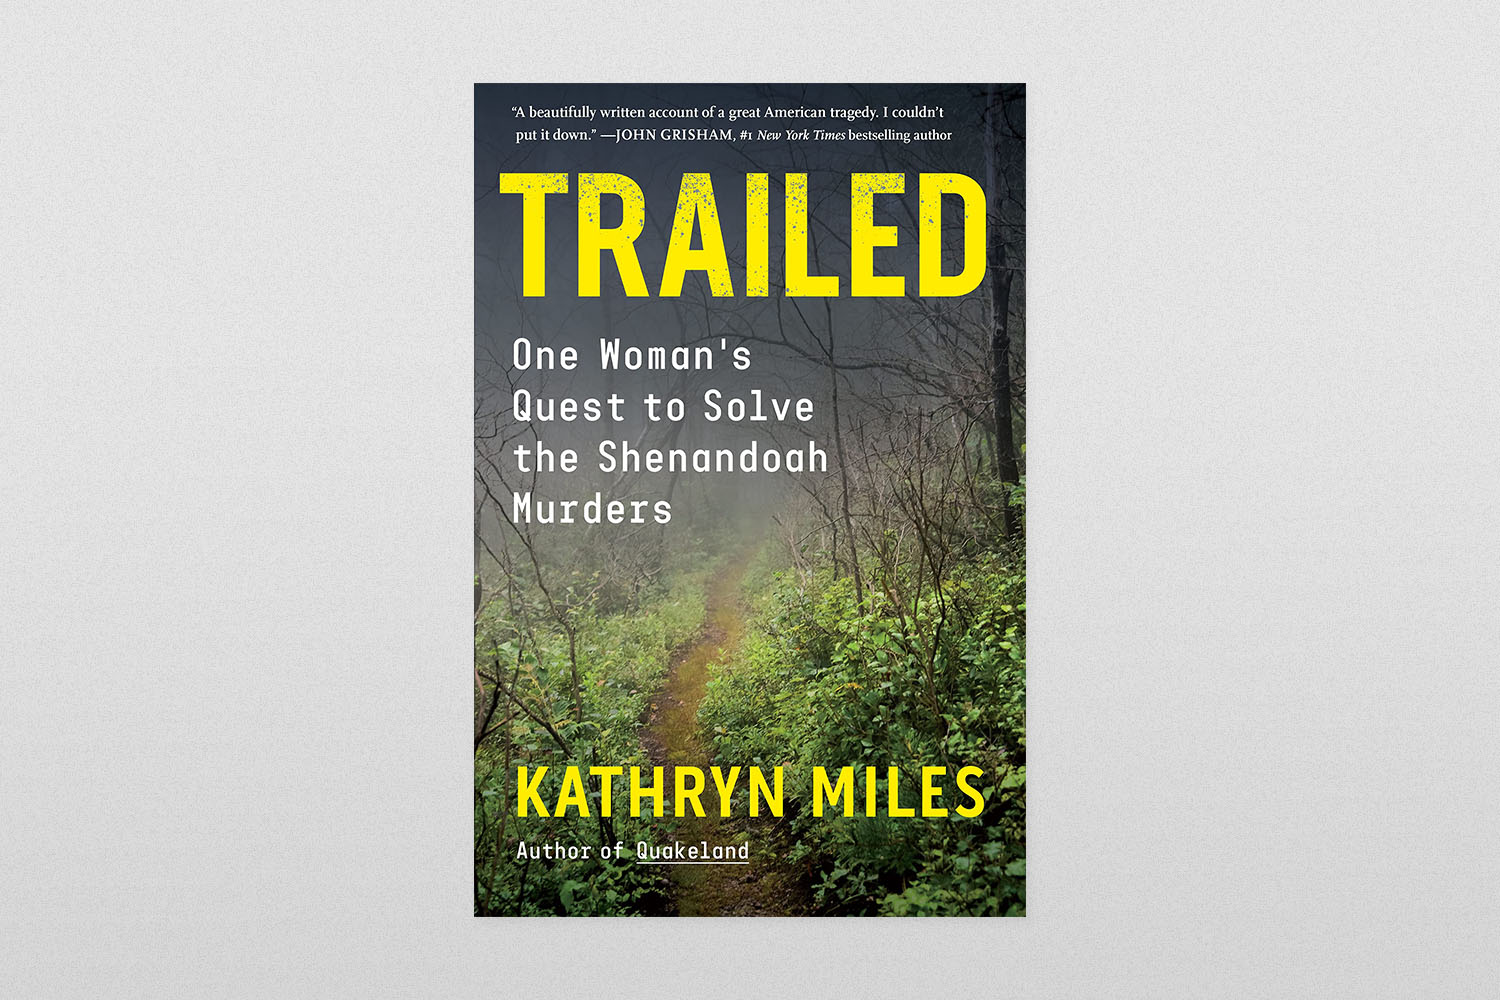 Trailed- One Woman's Quest to Solve the Shenandoah Murders by Kathryn Miles